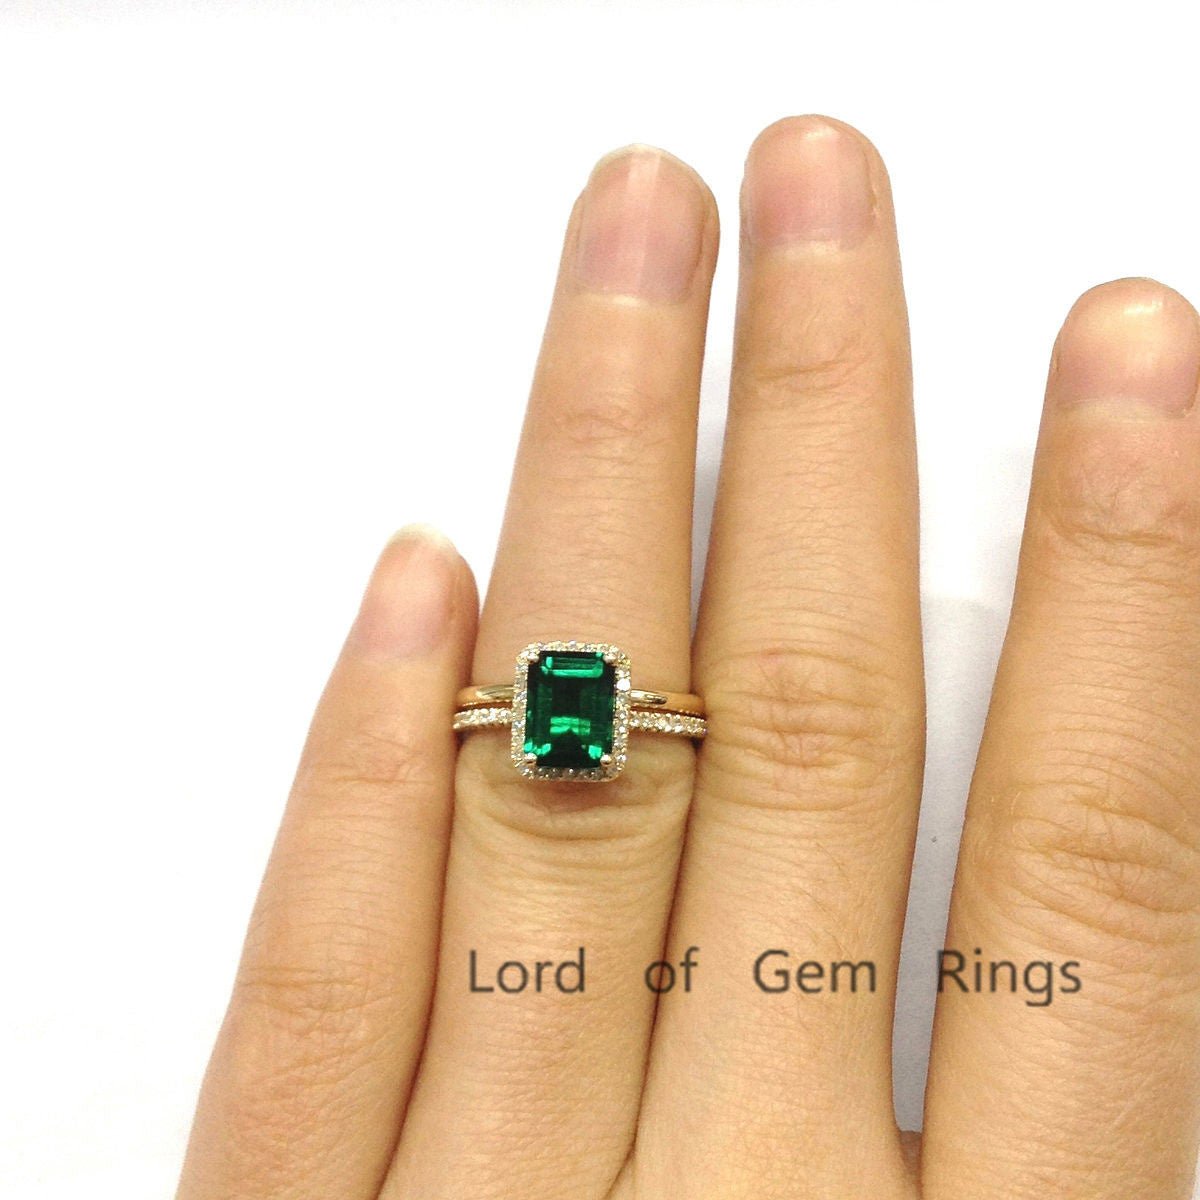 Emerald Shape Emerald Diamond Halo Ring with Plain Gold Band Bridal Set - Lord of Gem Rings